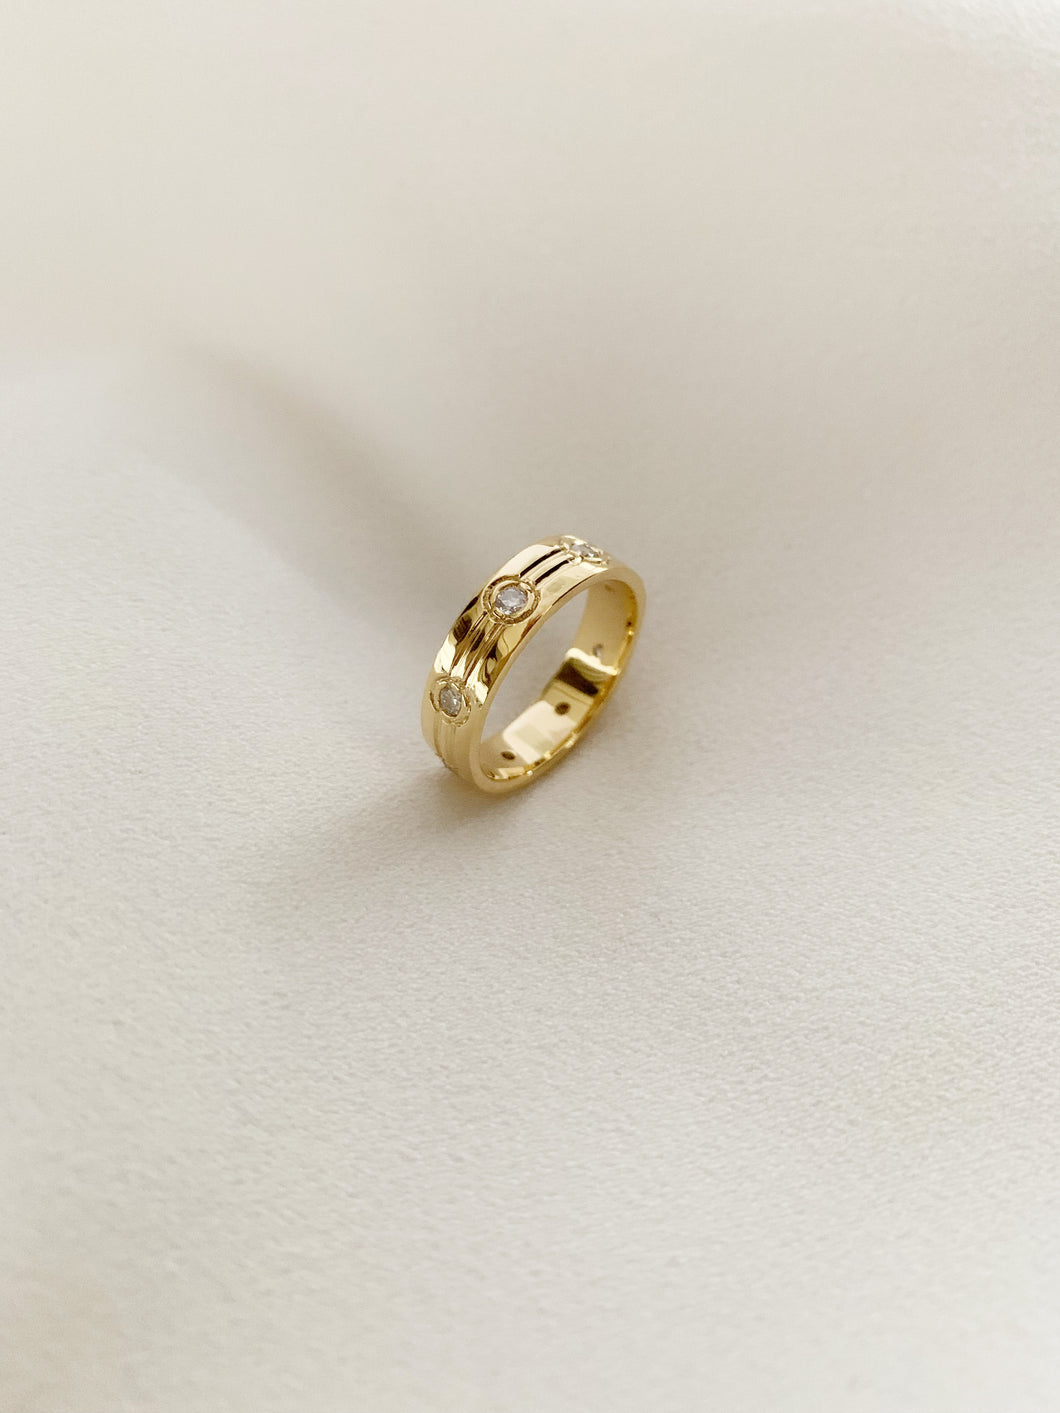 Yellow gold ring with 2 lines in it and small round diamonds around the ring.